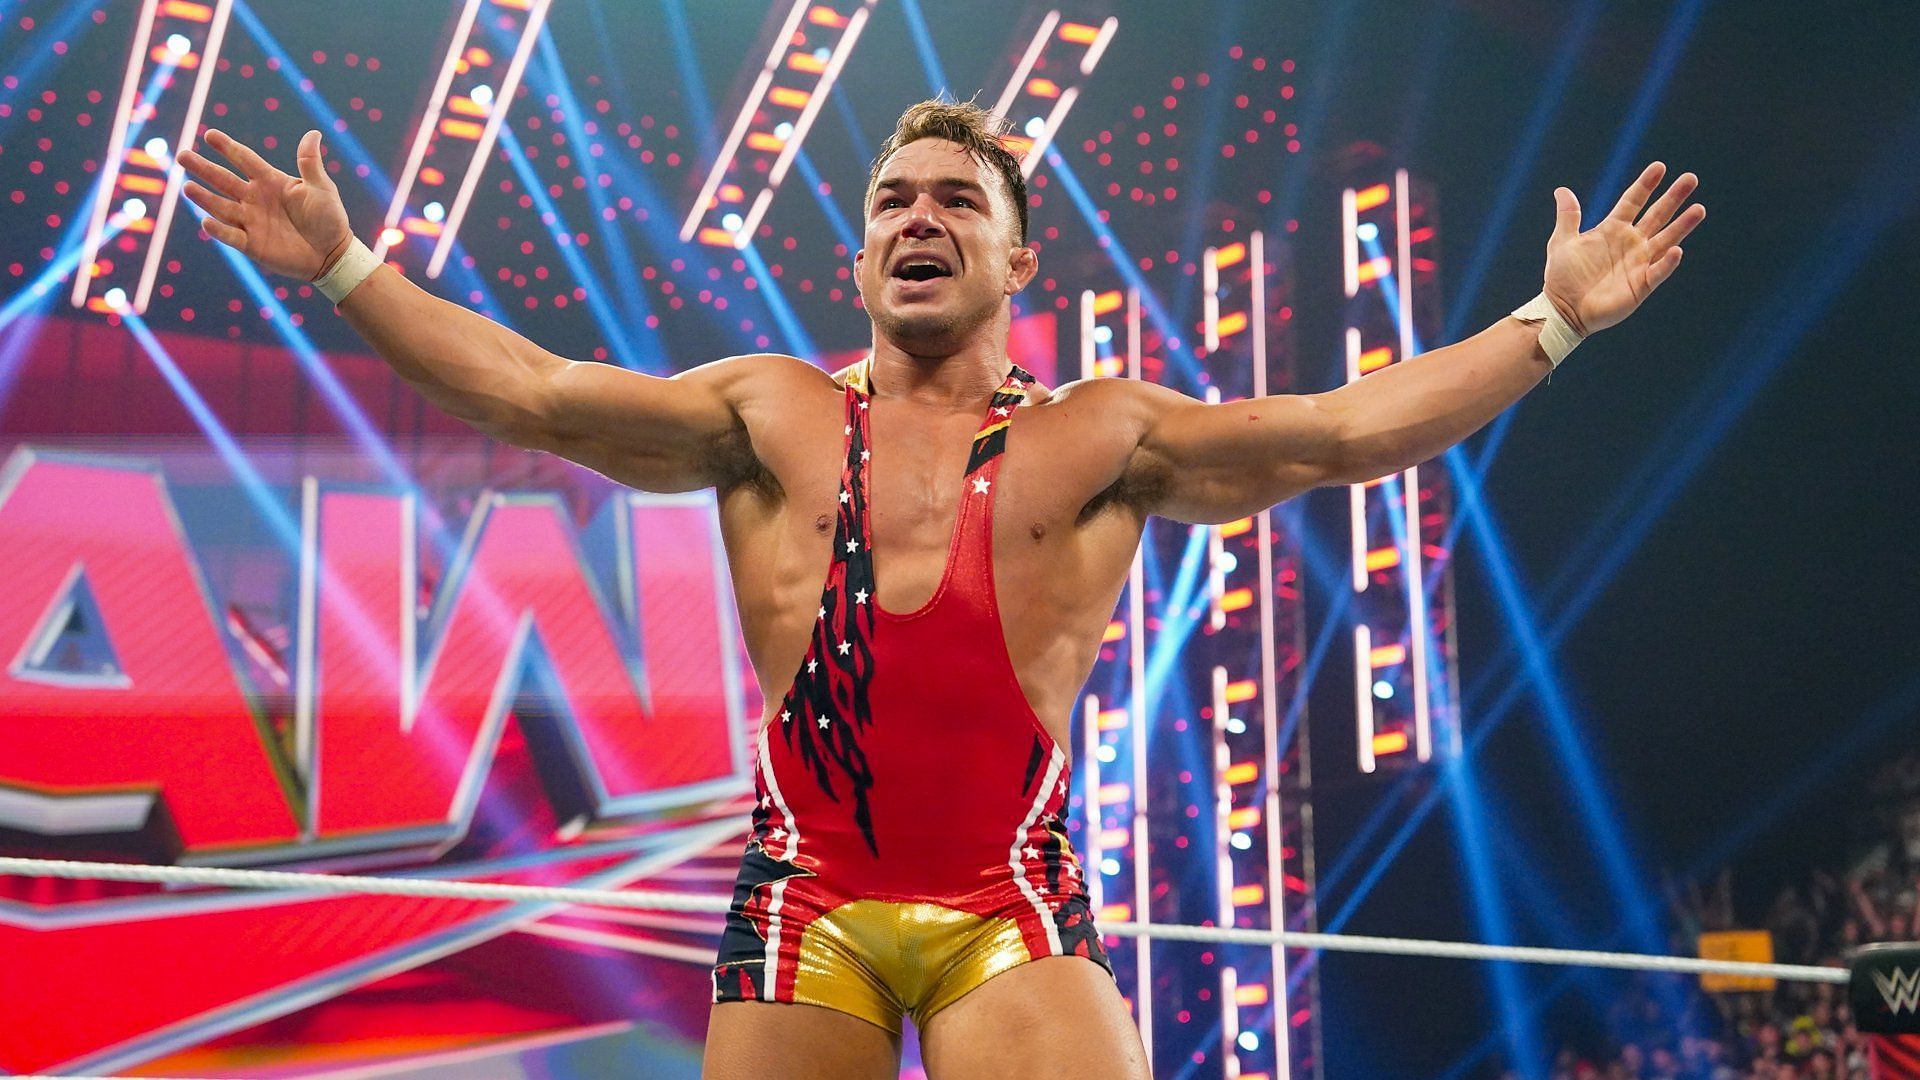 Chad Gable stands tall in the ring on WWE RAW